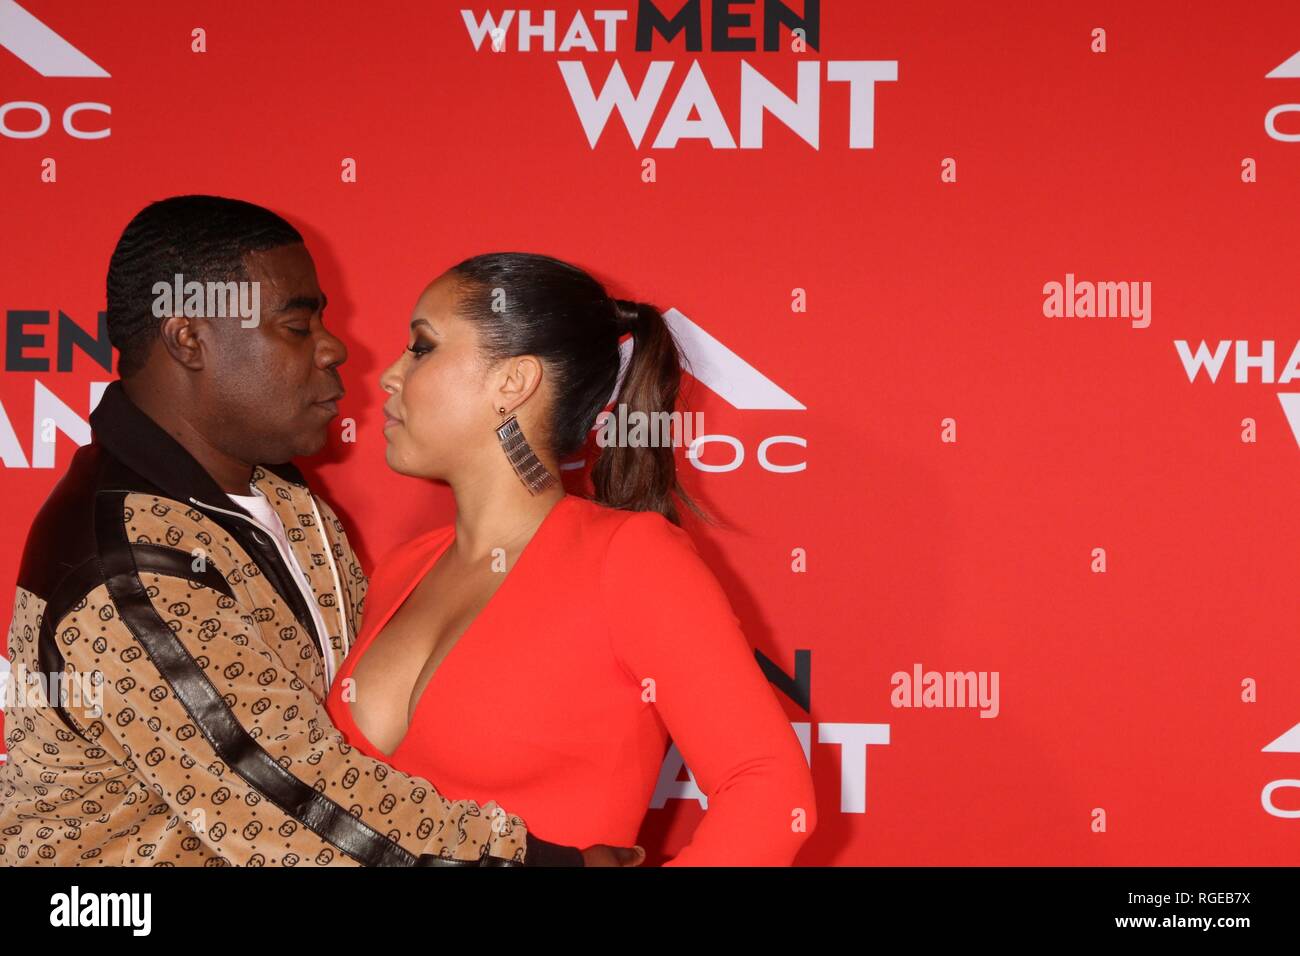 Los Angeles, CA, USA. 28th Jan, 2019. Tracy Morgan, Megan Wollover at arrivals for WHAT MEN WANT Premiere, Regency Village Theatre - Westwood, Los Angeles, CA January 28, 2019. Credit: Priscilla Grant/Everett Collection/Alamy Live News Stock Photo